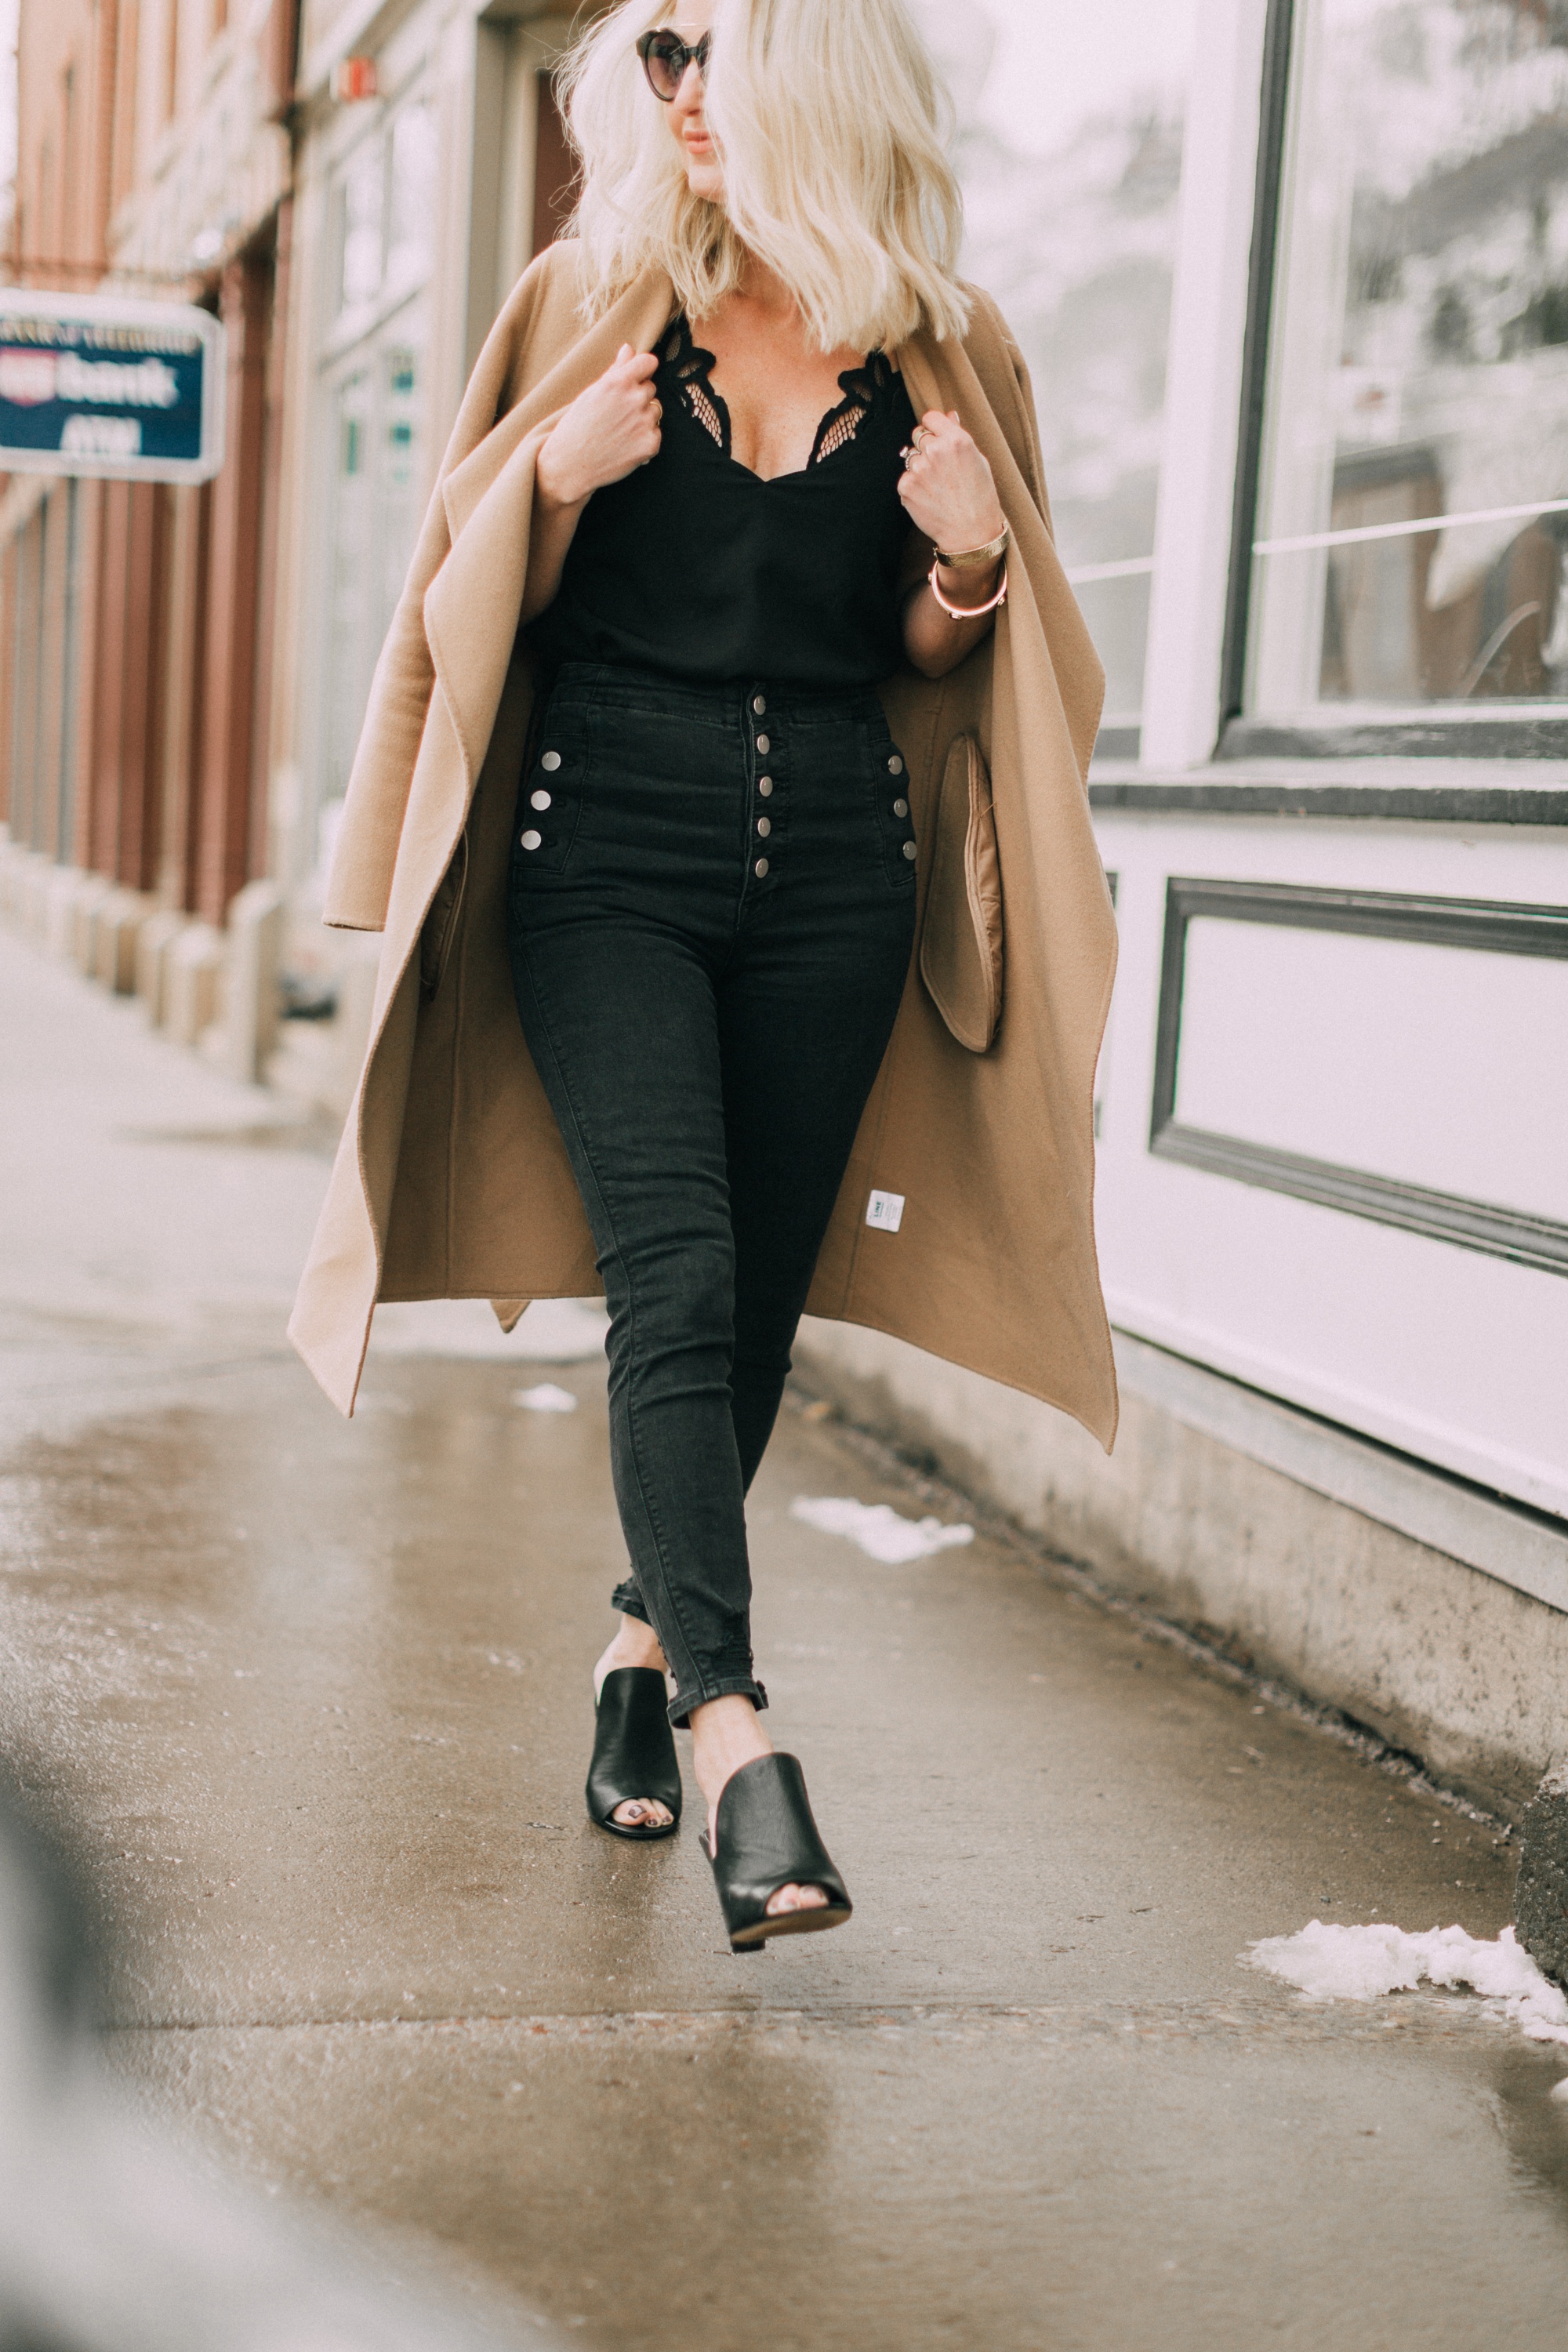 Shoe Trend: Mules, featuring the black Gerrty mules from Vince Camuto with black jeans by J. Brand, black cami, and camel coat worn by fashion blogger over 40 Erin Busbee of BusbeeStyle.com in Telluride, Colorado